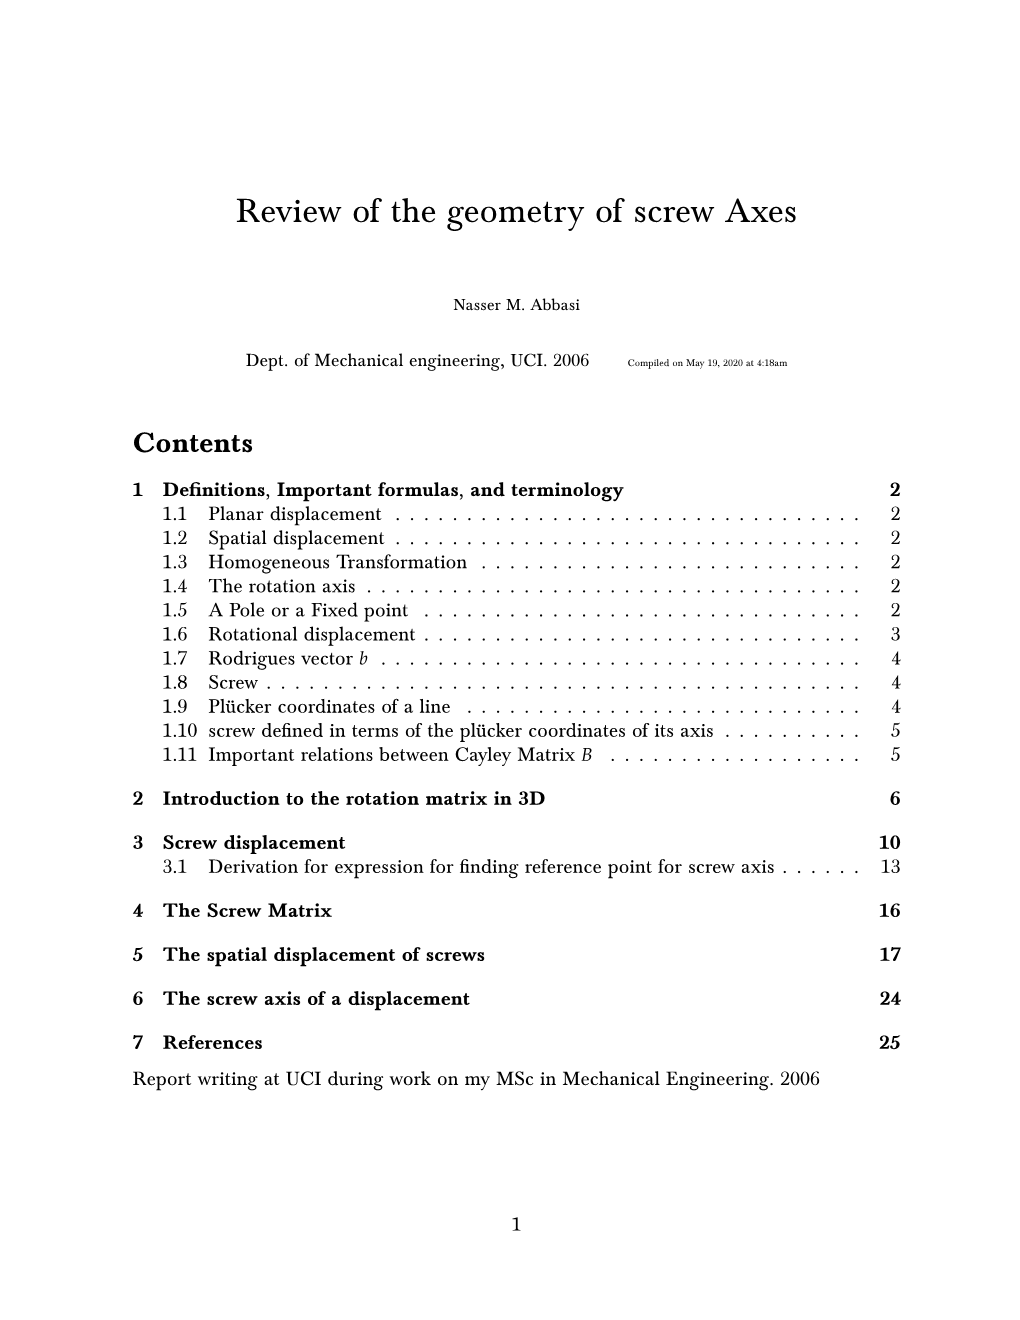 Review of the Geometry of Screw Axes